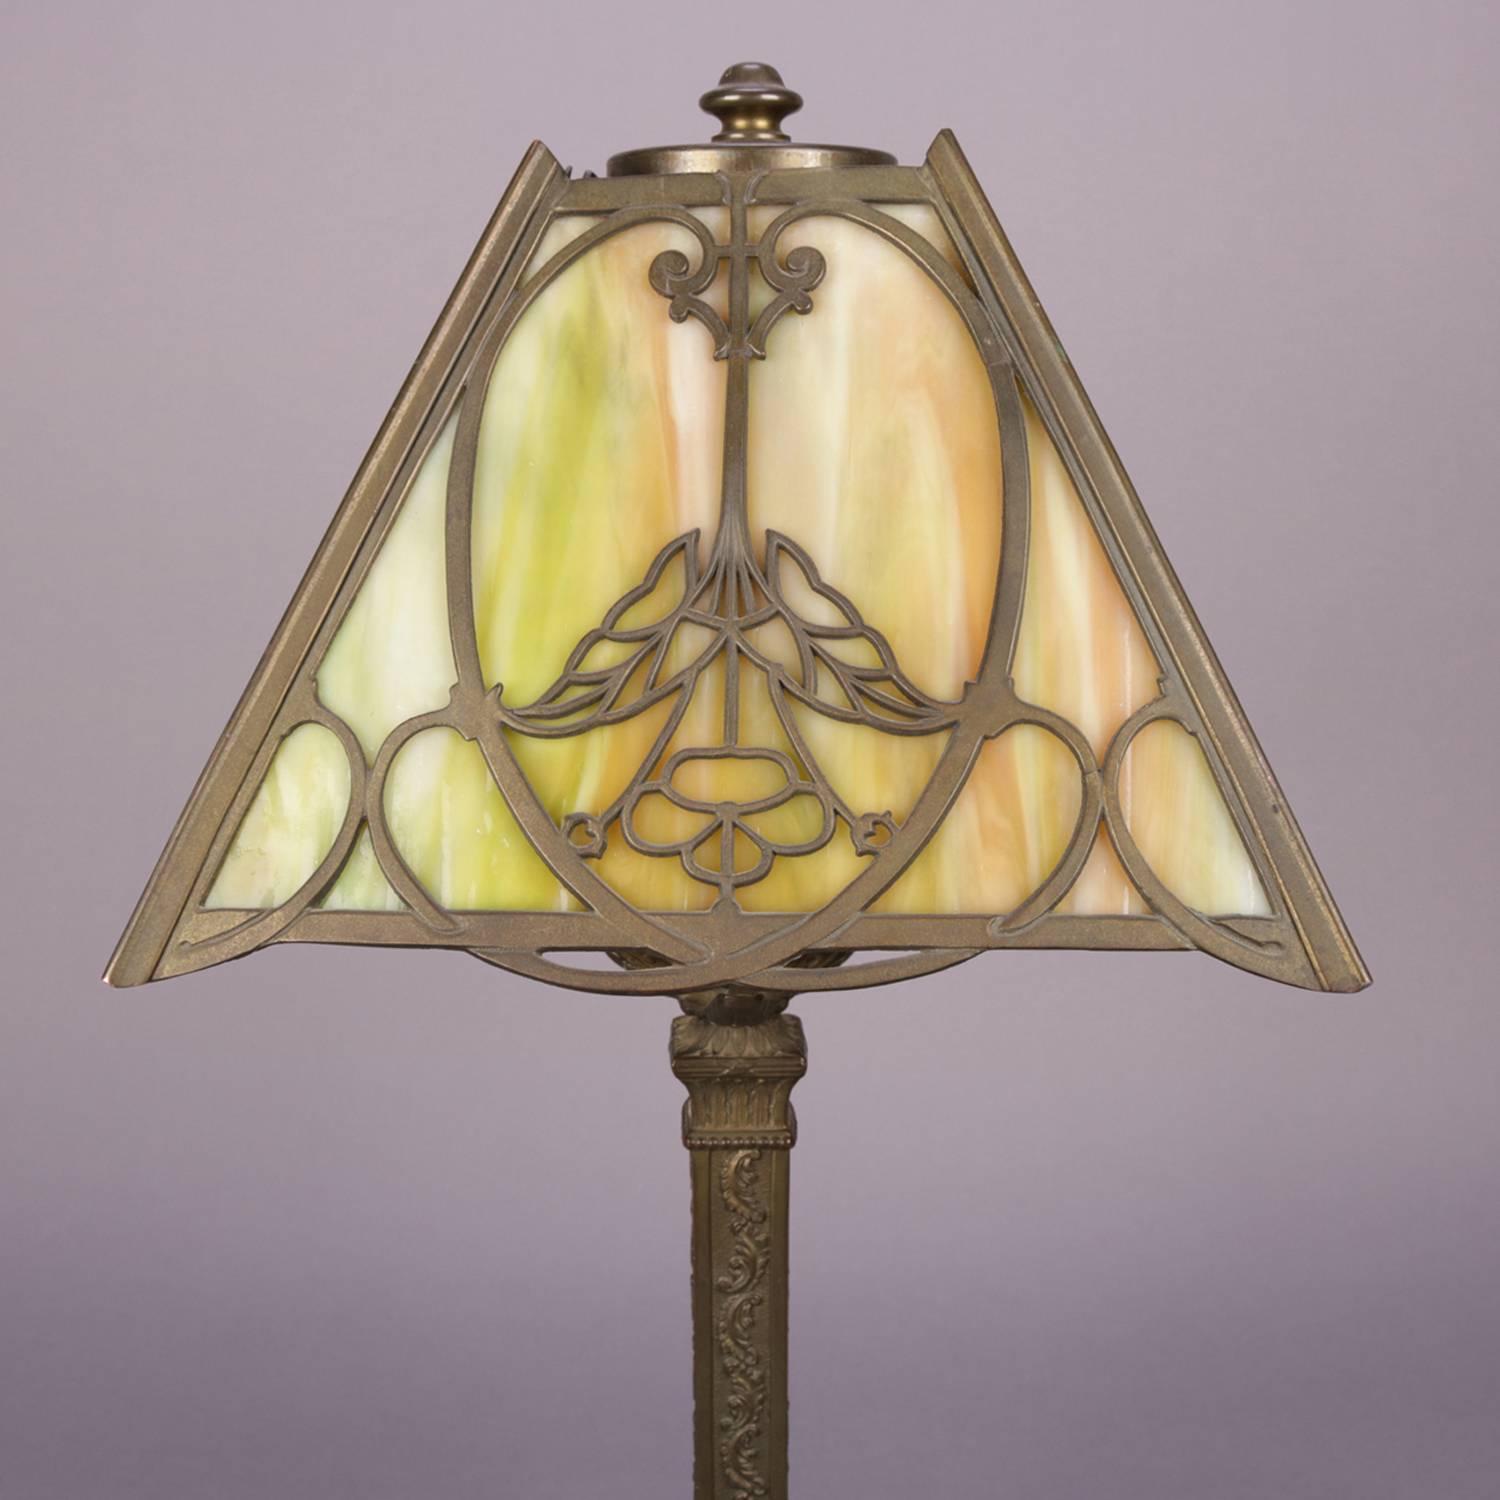 Antique Bradley & Hubbard School table lamp features four panel pierced foliate filigree shade with central stylized flower on each panel and housing slag glass panes, cast base is footed and with embossed foliate decoration, circa